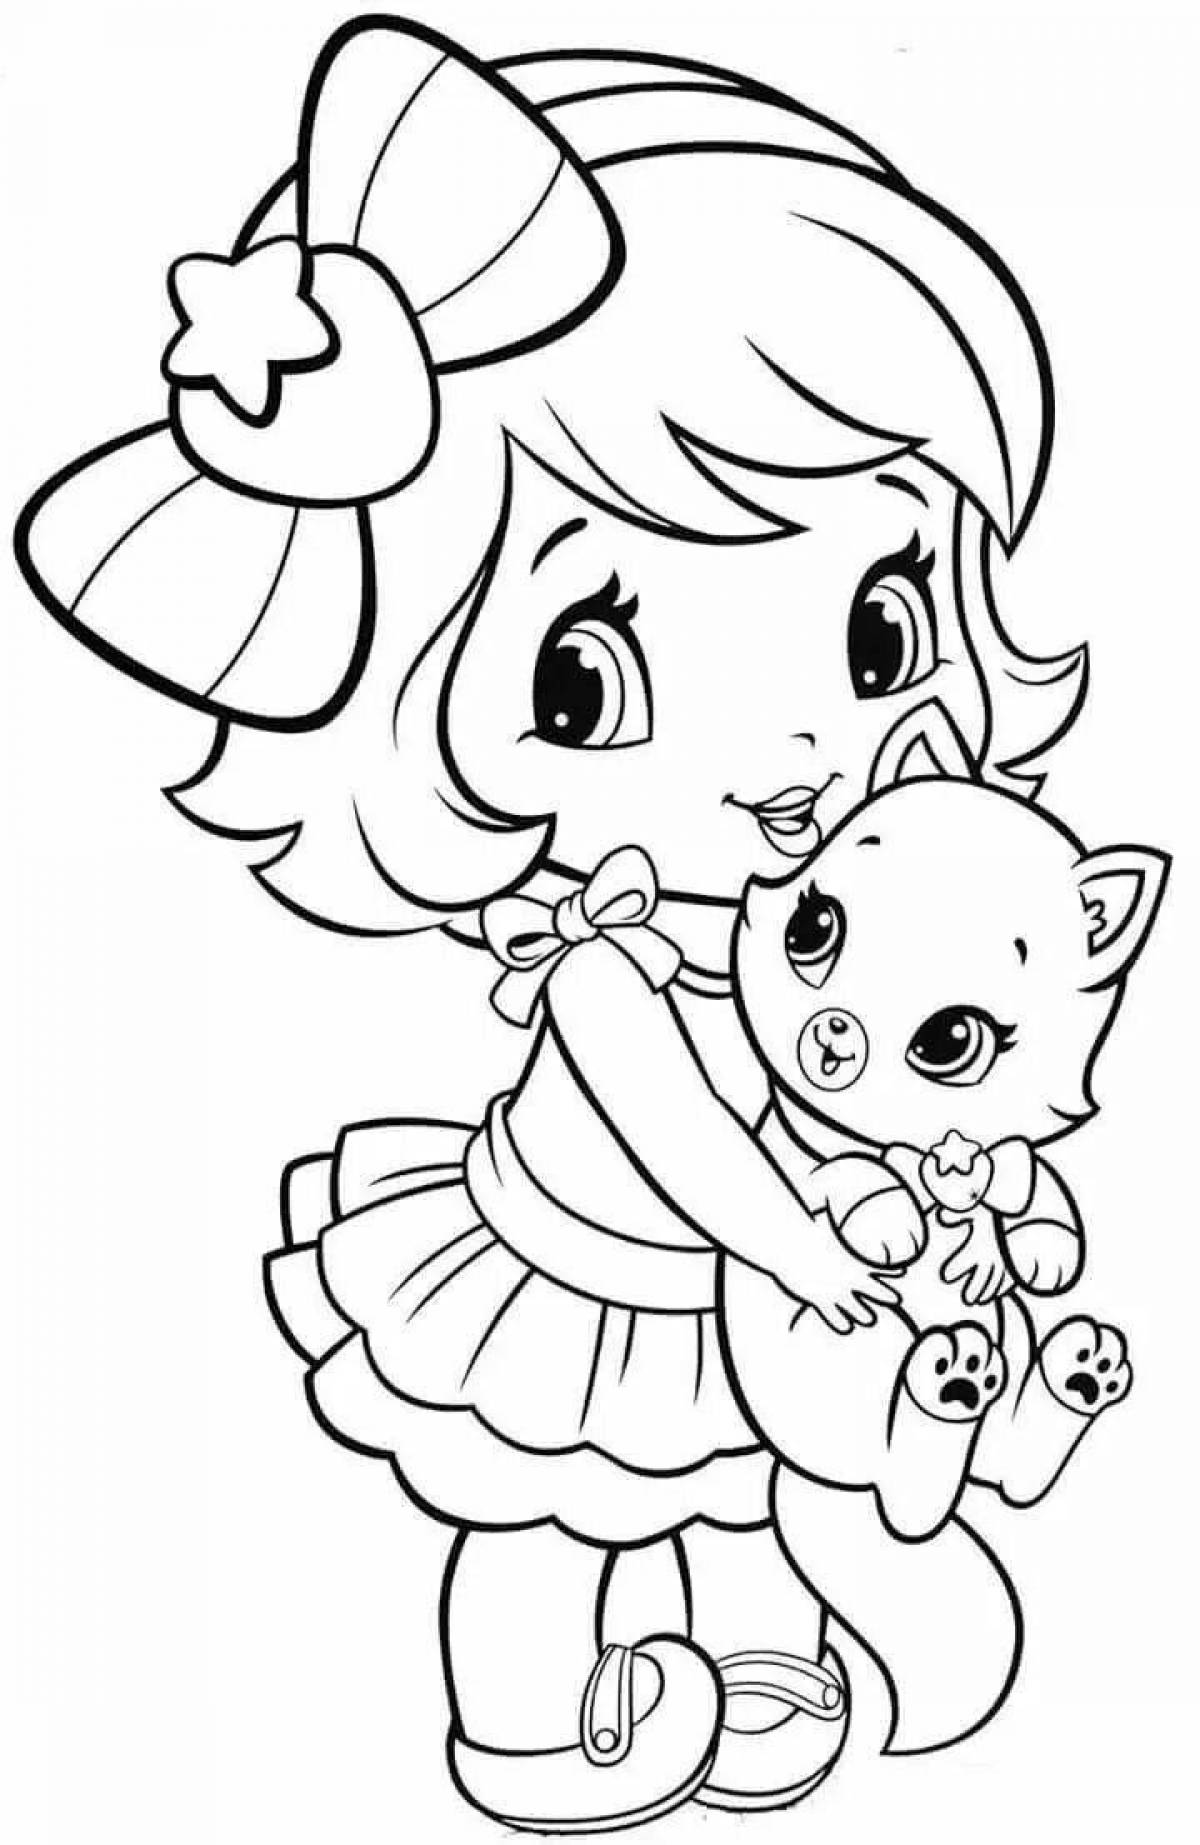 Violent coloring page 6 for girls